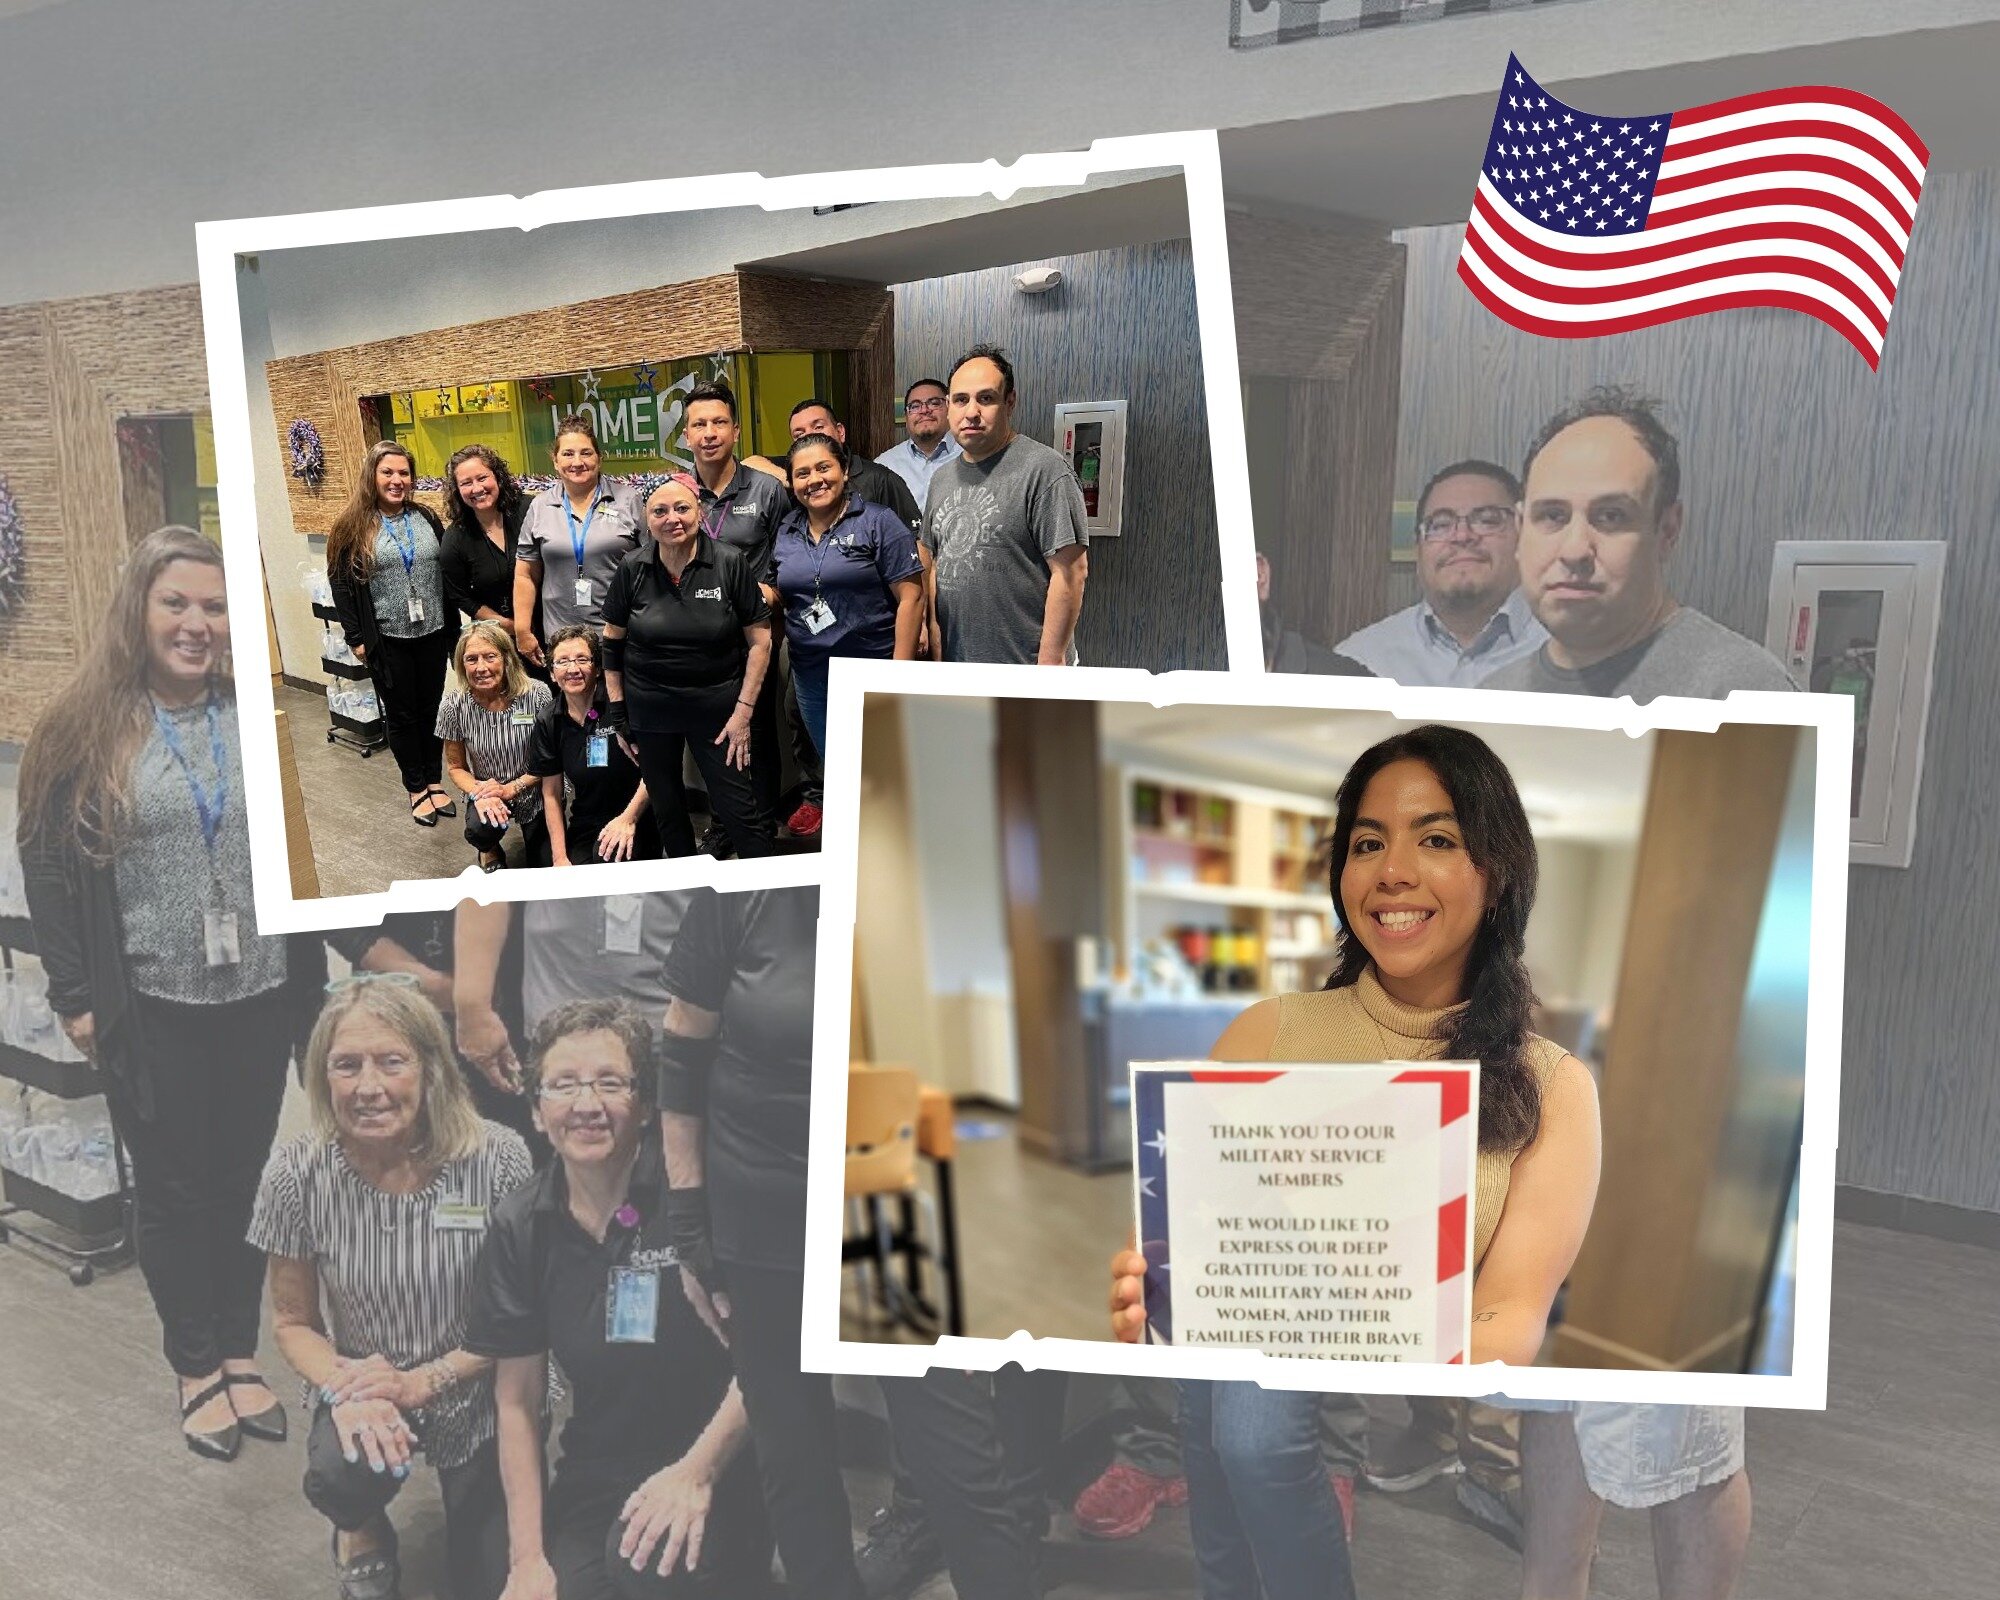 Big shout out to @home2suitessanantoniorim for going above and beyond in honoring our military during Military Appreciation Month!

Thank you for recognizing the sacrifices and service of our brave men and women in uniform.

#MilitaryAppreciationMont